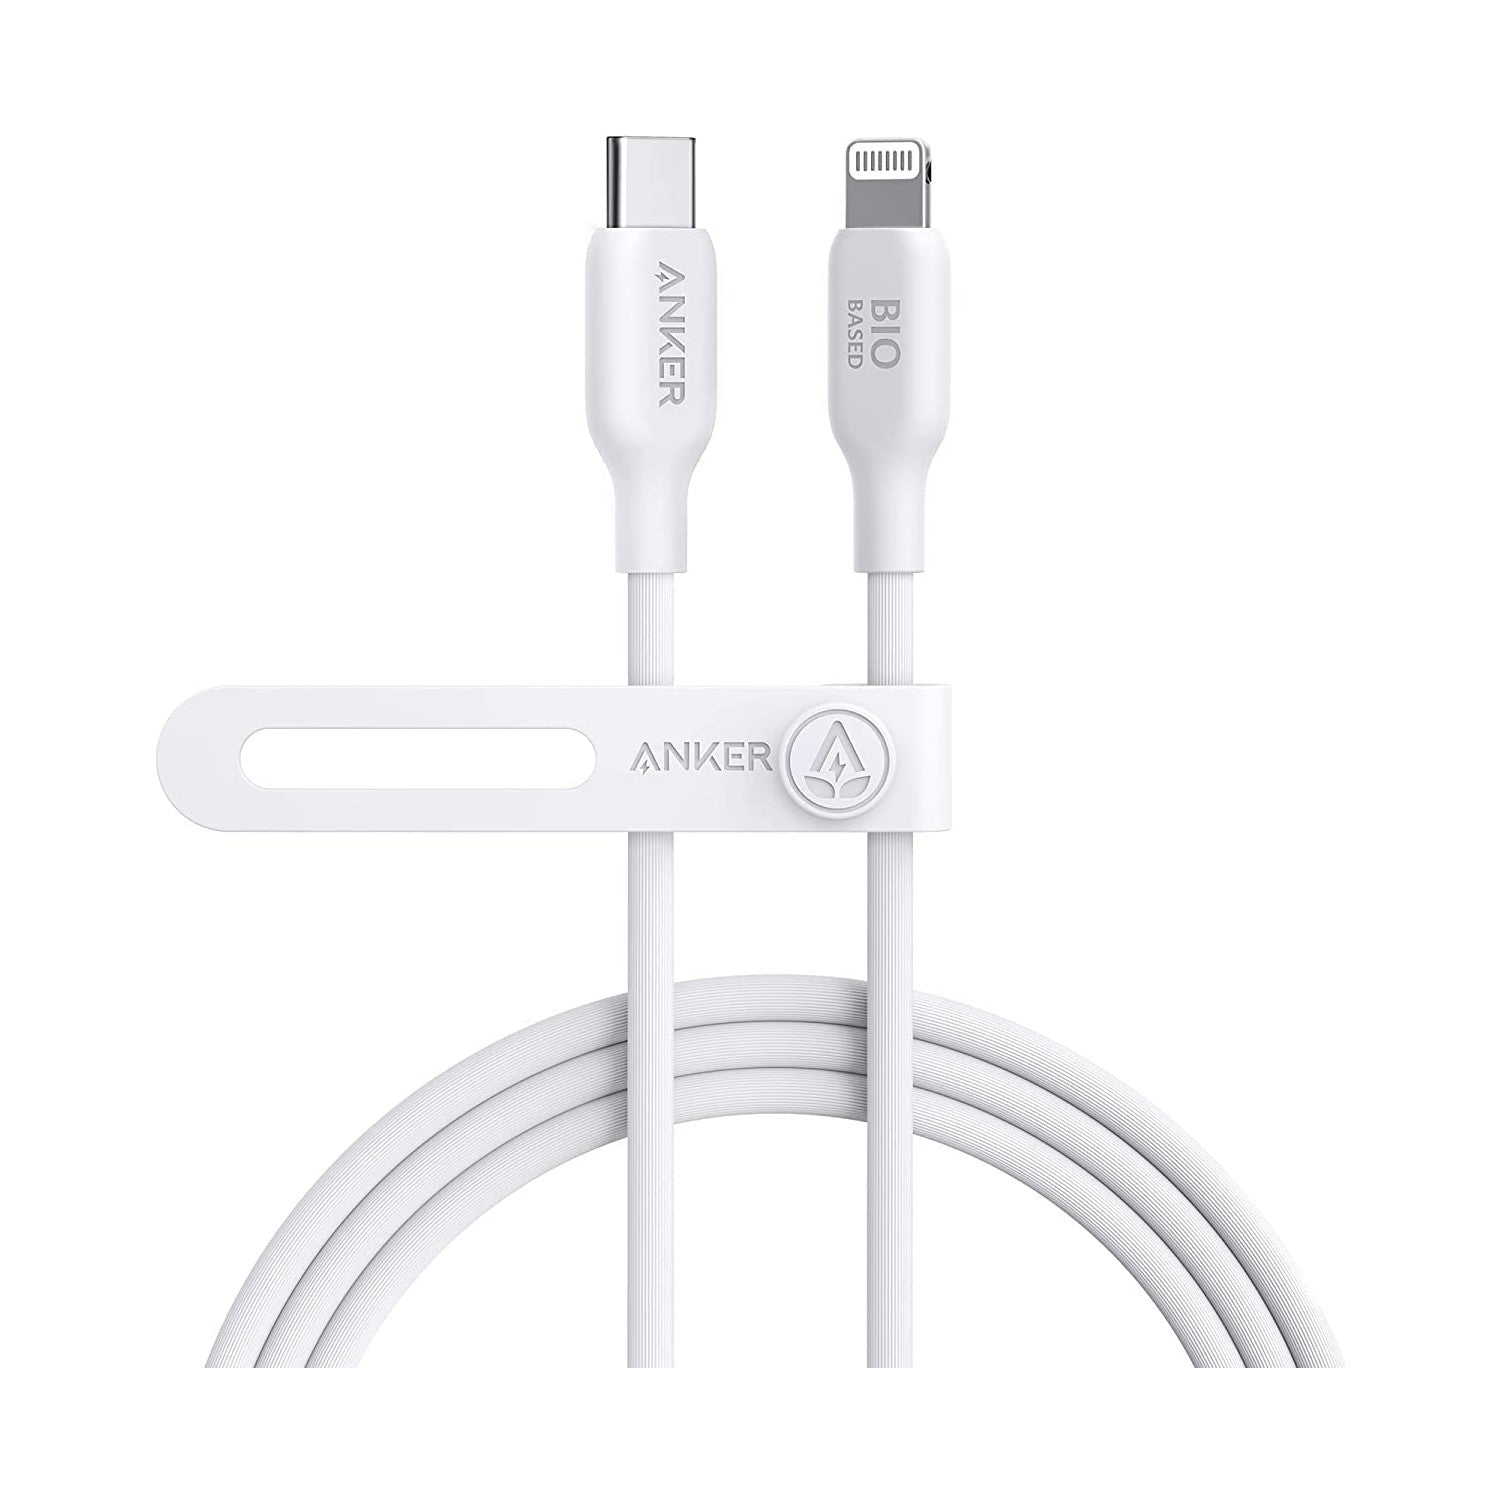 Anker 541 USB-C to Lightning 1.8m Charging Cable with 30W Charging Support (Eco Friendly) - White